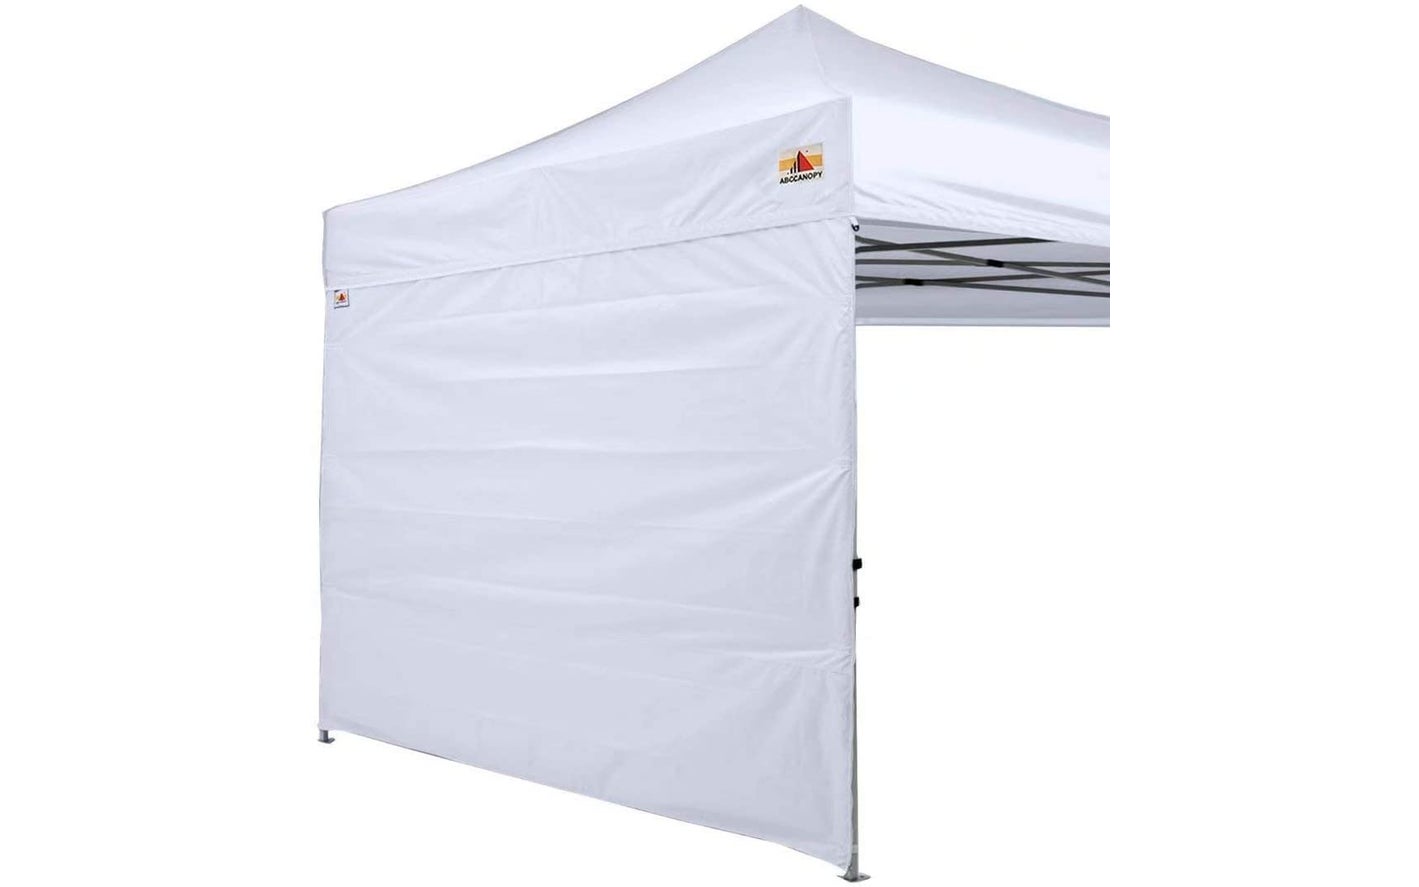 ABC Canopy Instant Sun Wall Tent